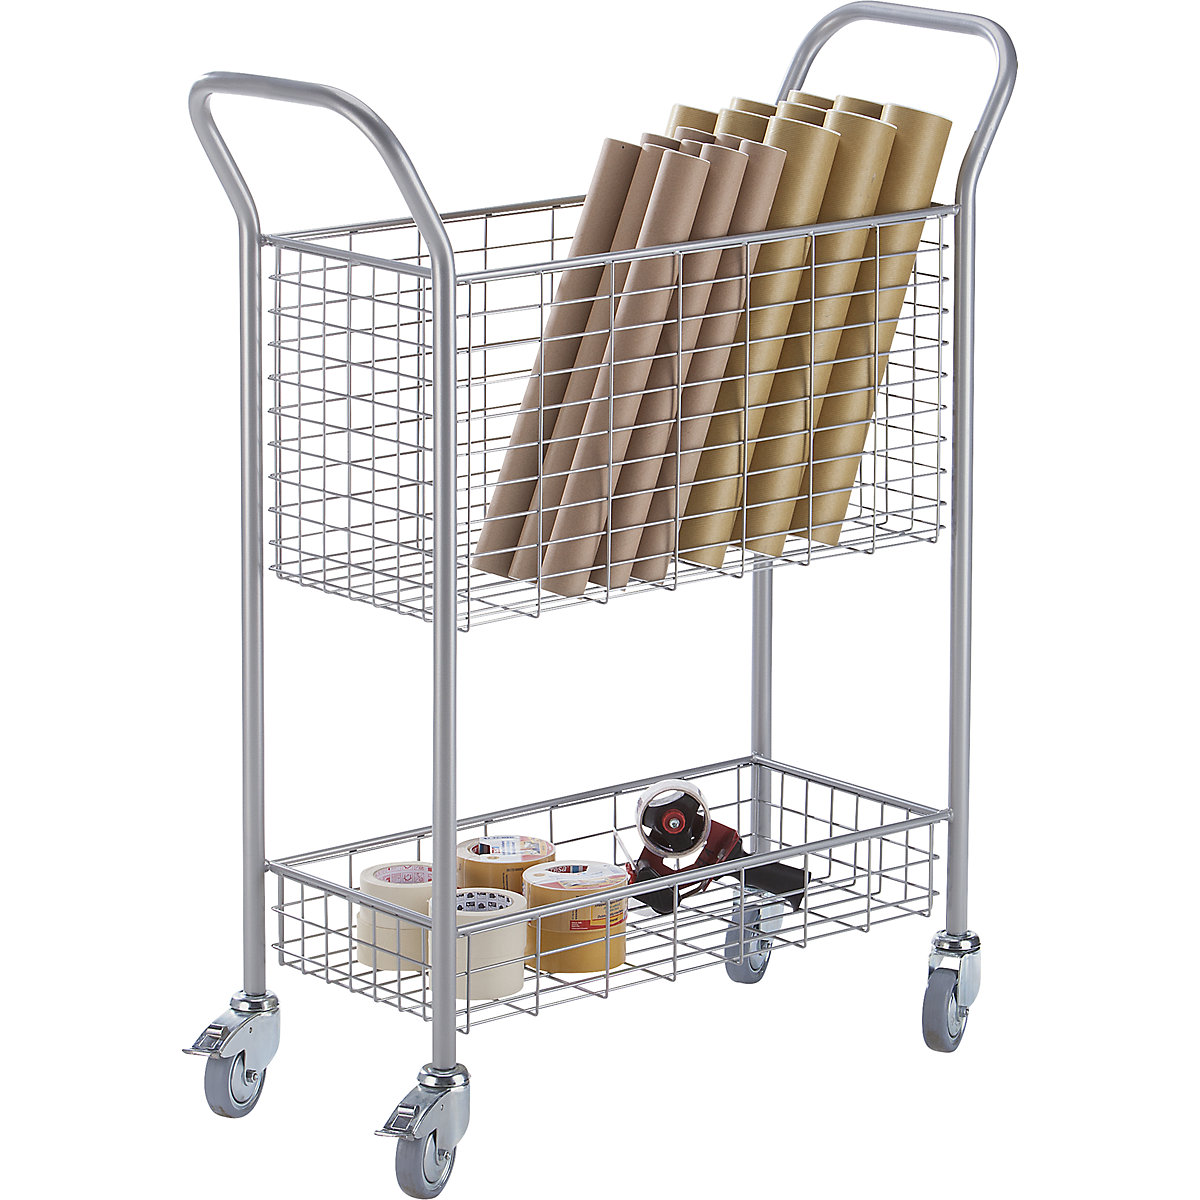 Office and mail distribution trolley – eurokraft pro